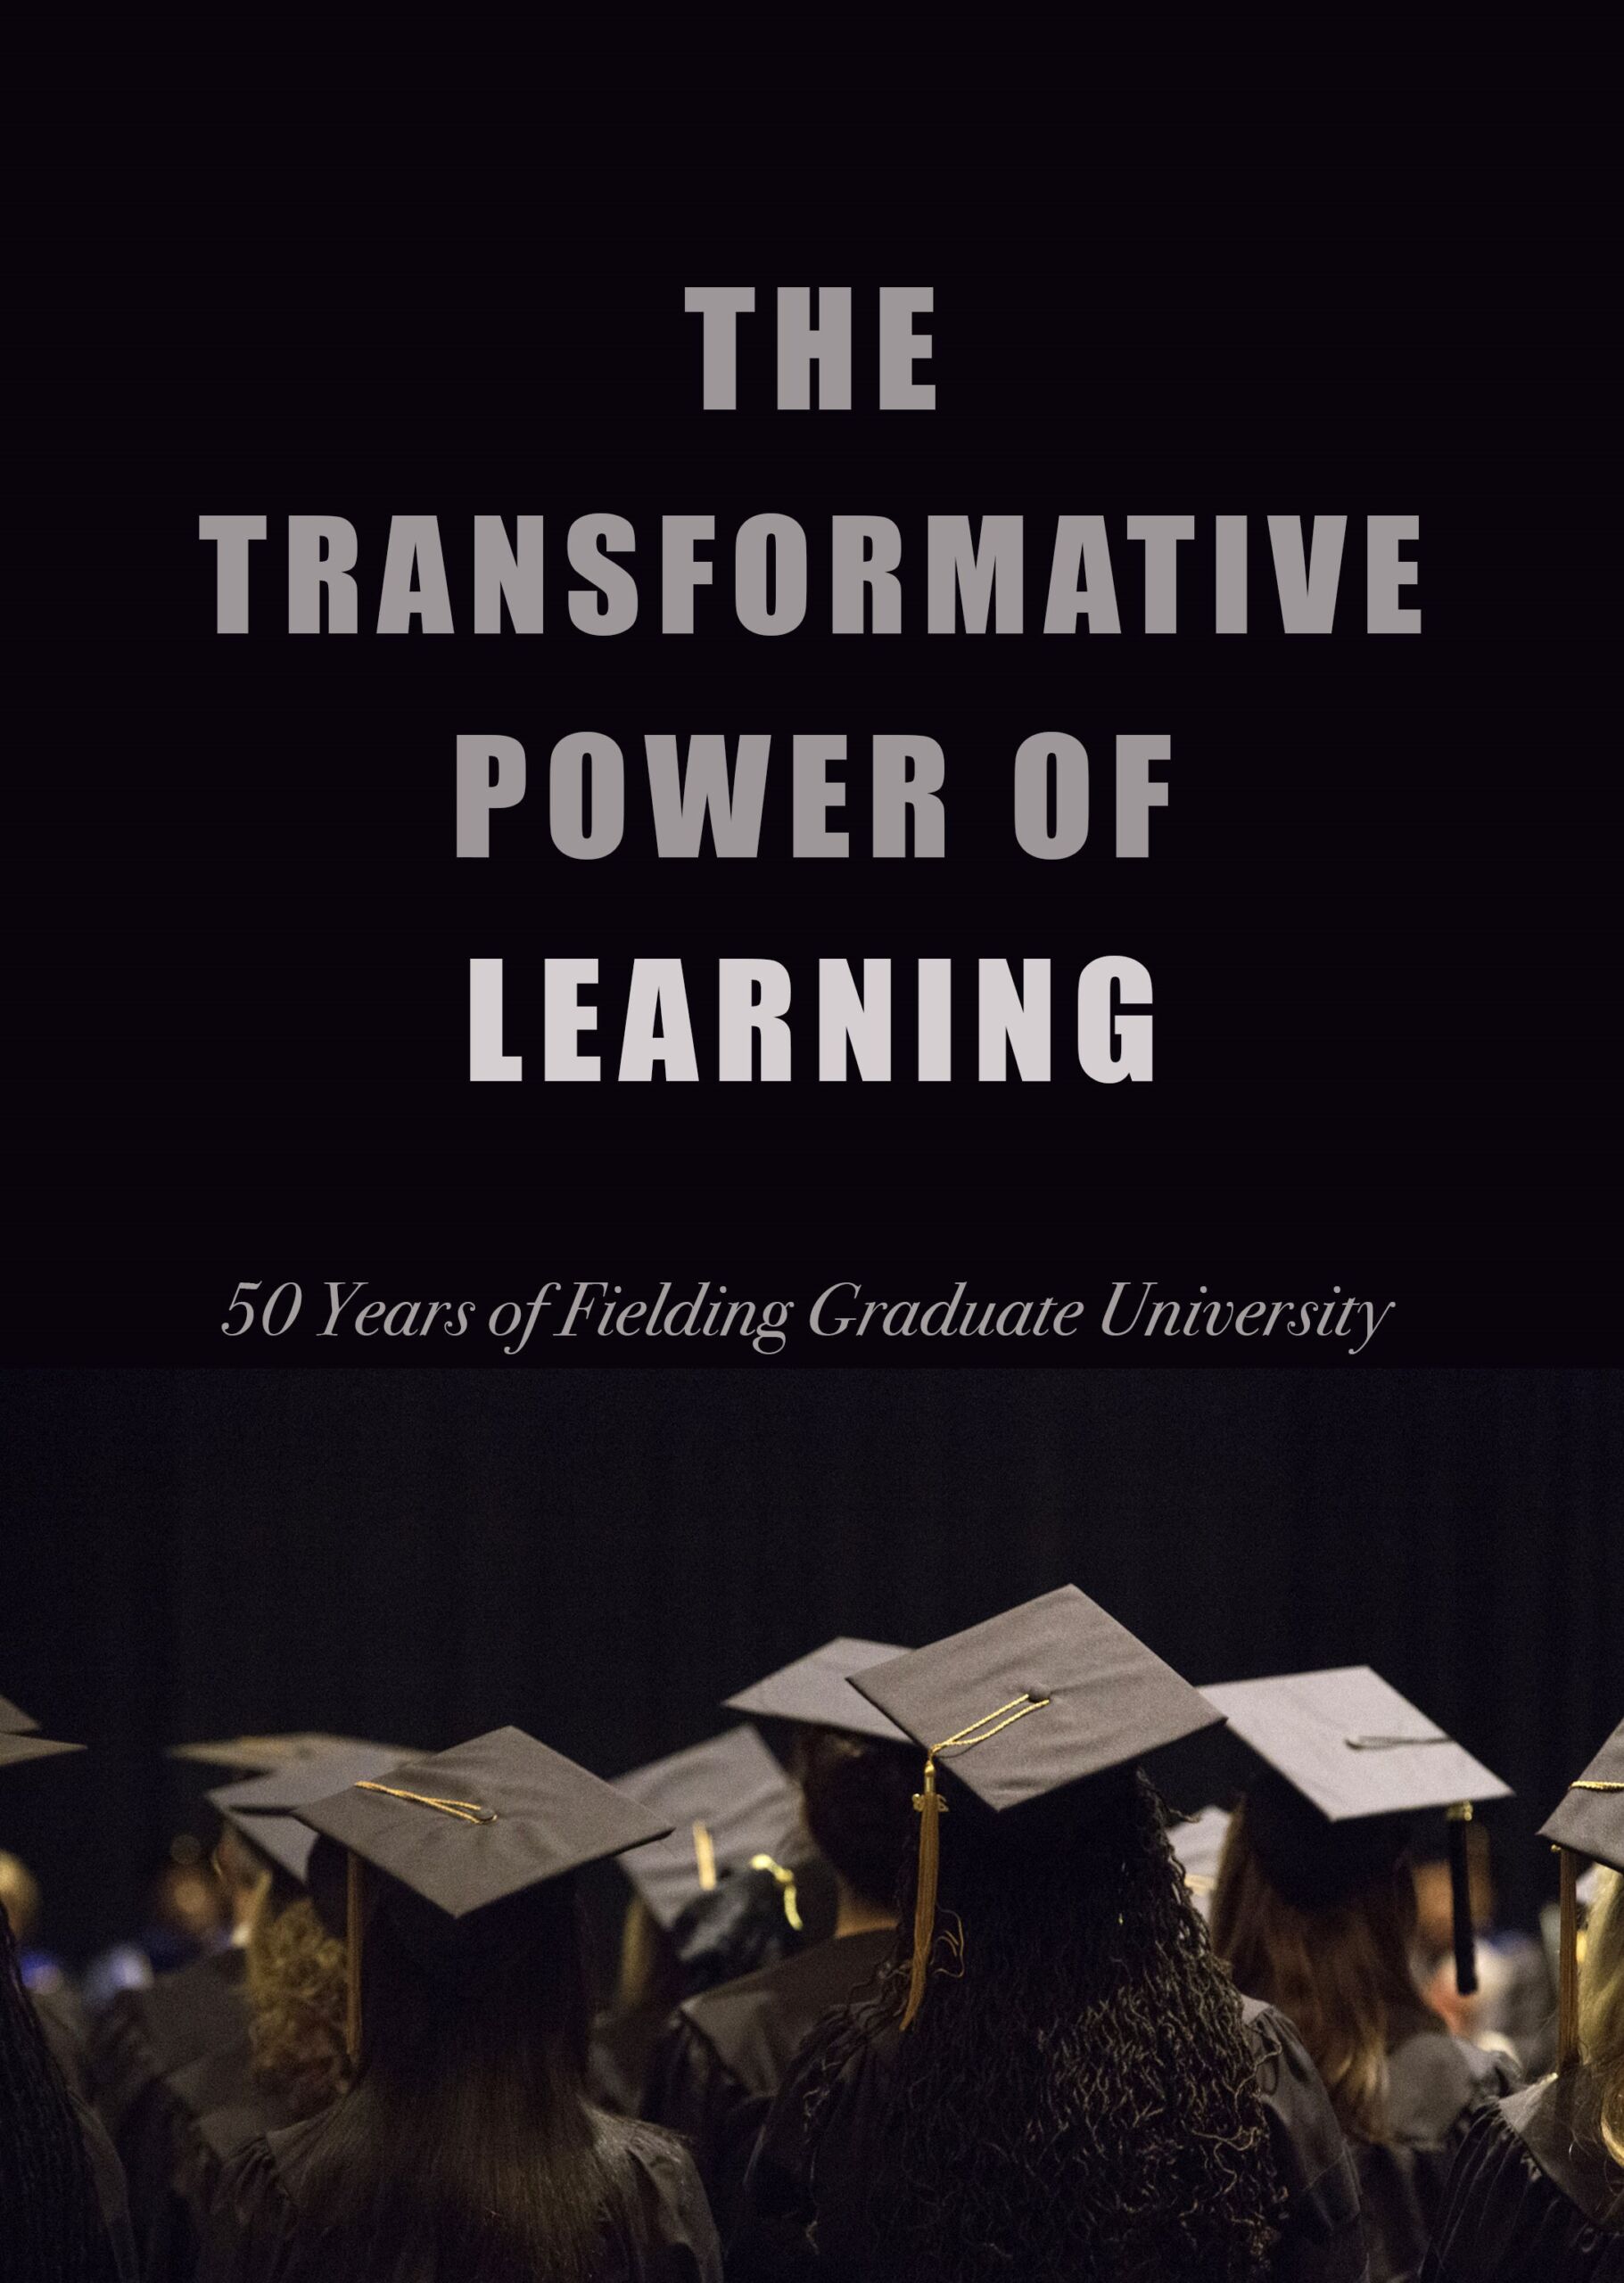 The Transformative Power of Learning book cover